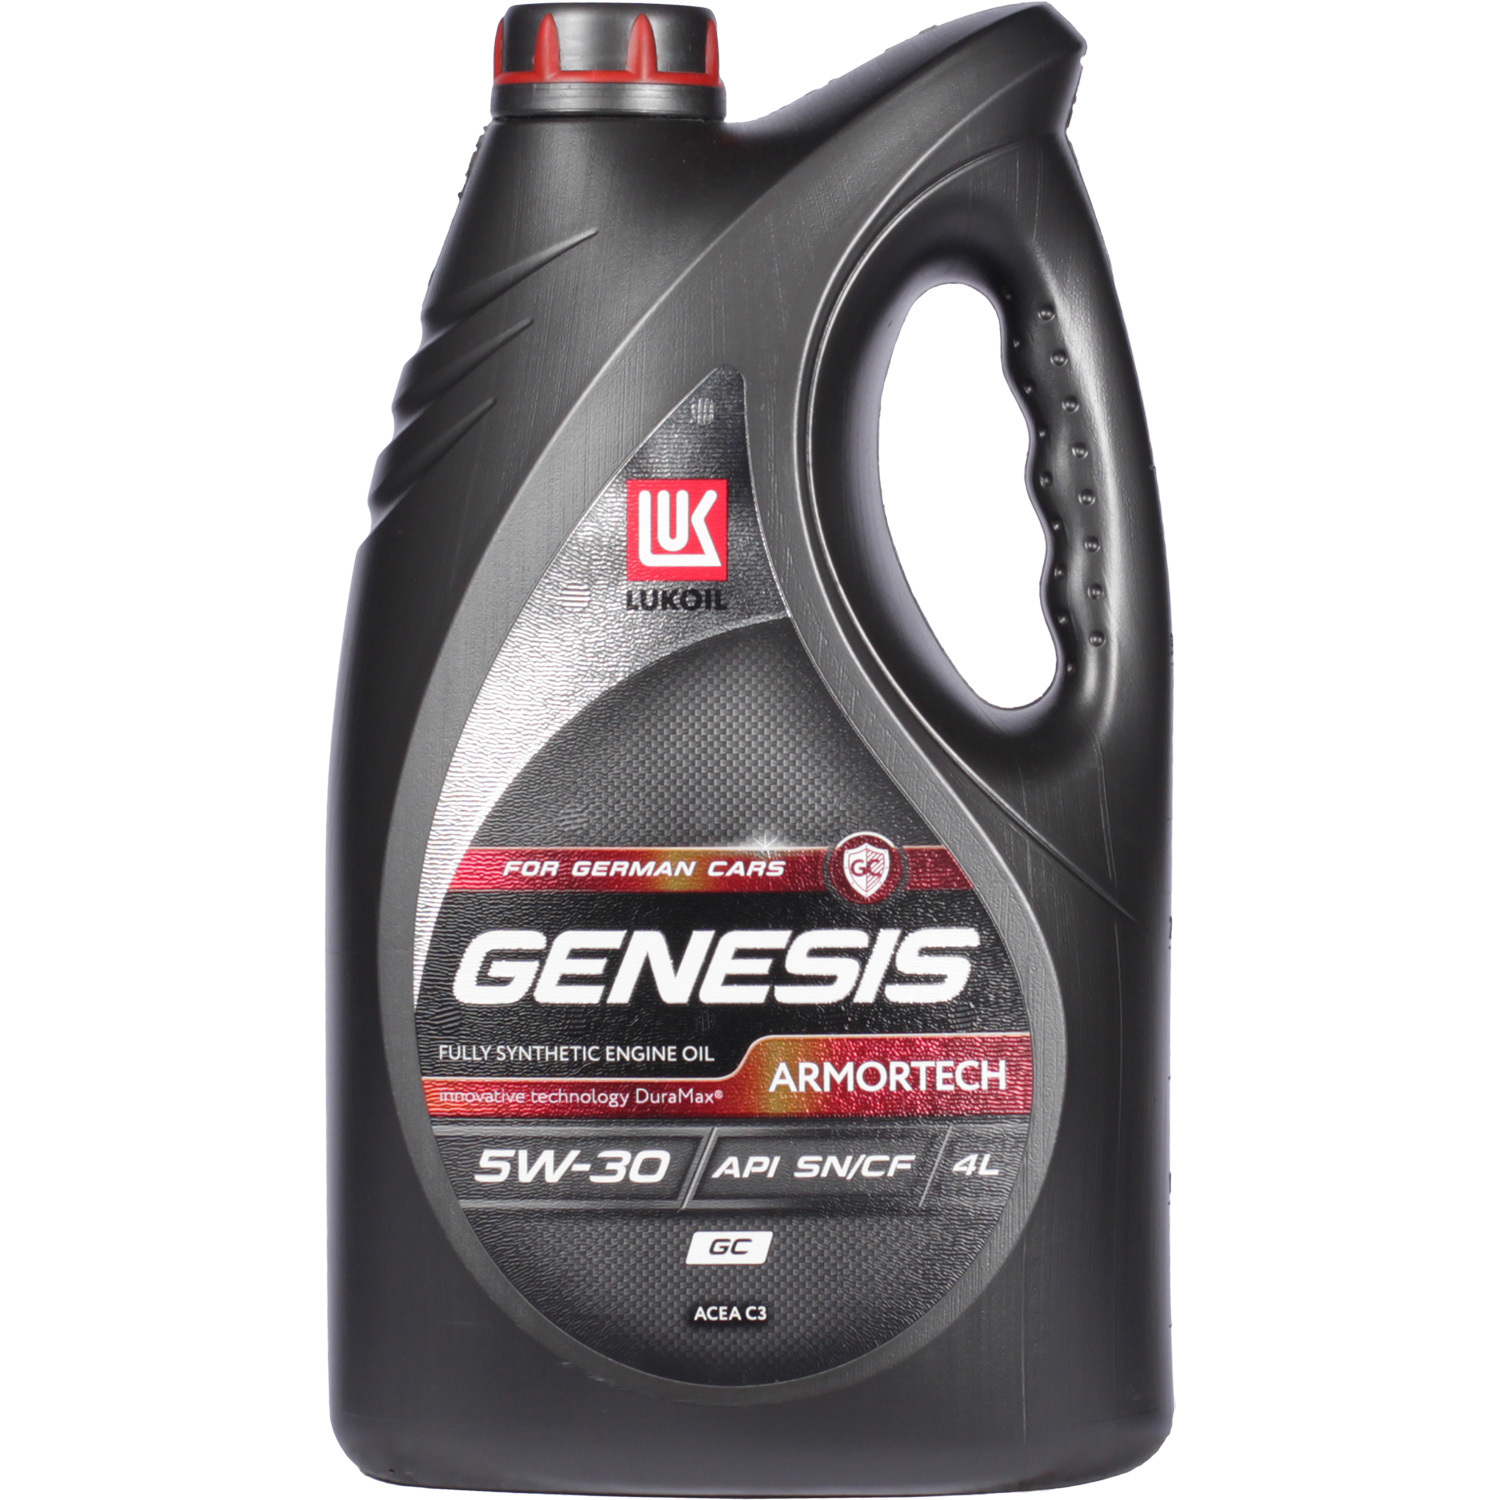 Lukoil Моторное масло Lukoil Genesis Armortech GC 5W-30, 4 л моторное масло lukoil genesis armortech fd 5w 30 1л синтетическое [3149867]